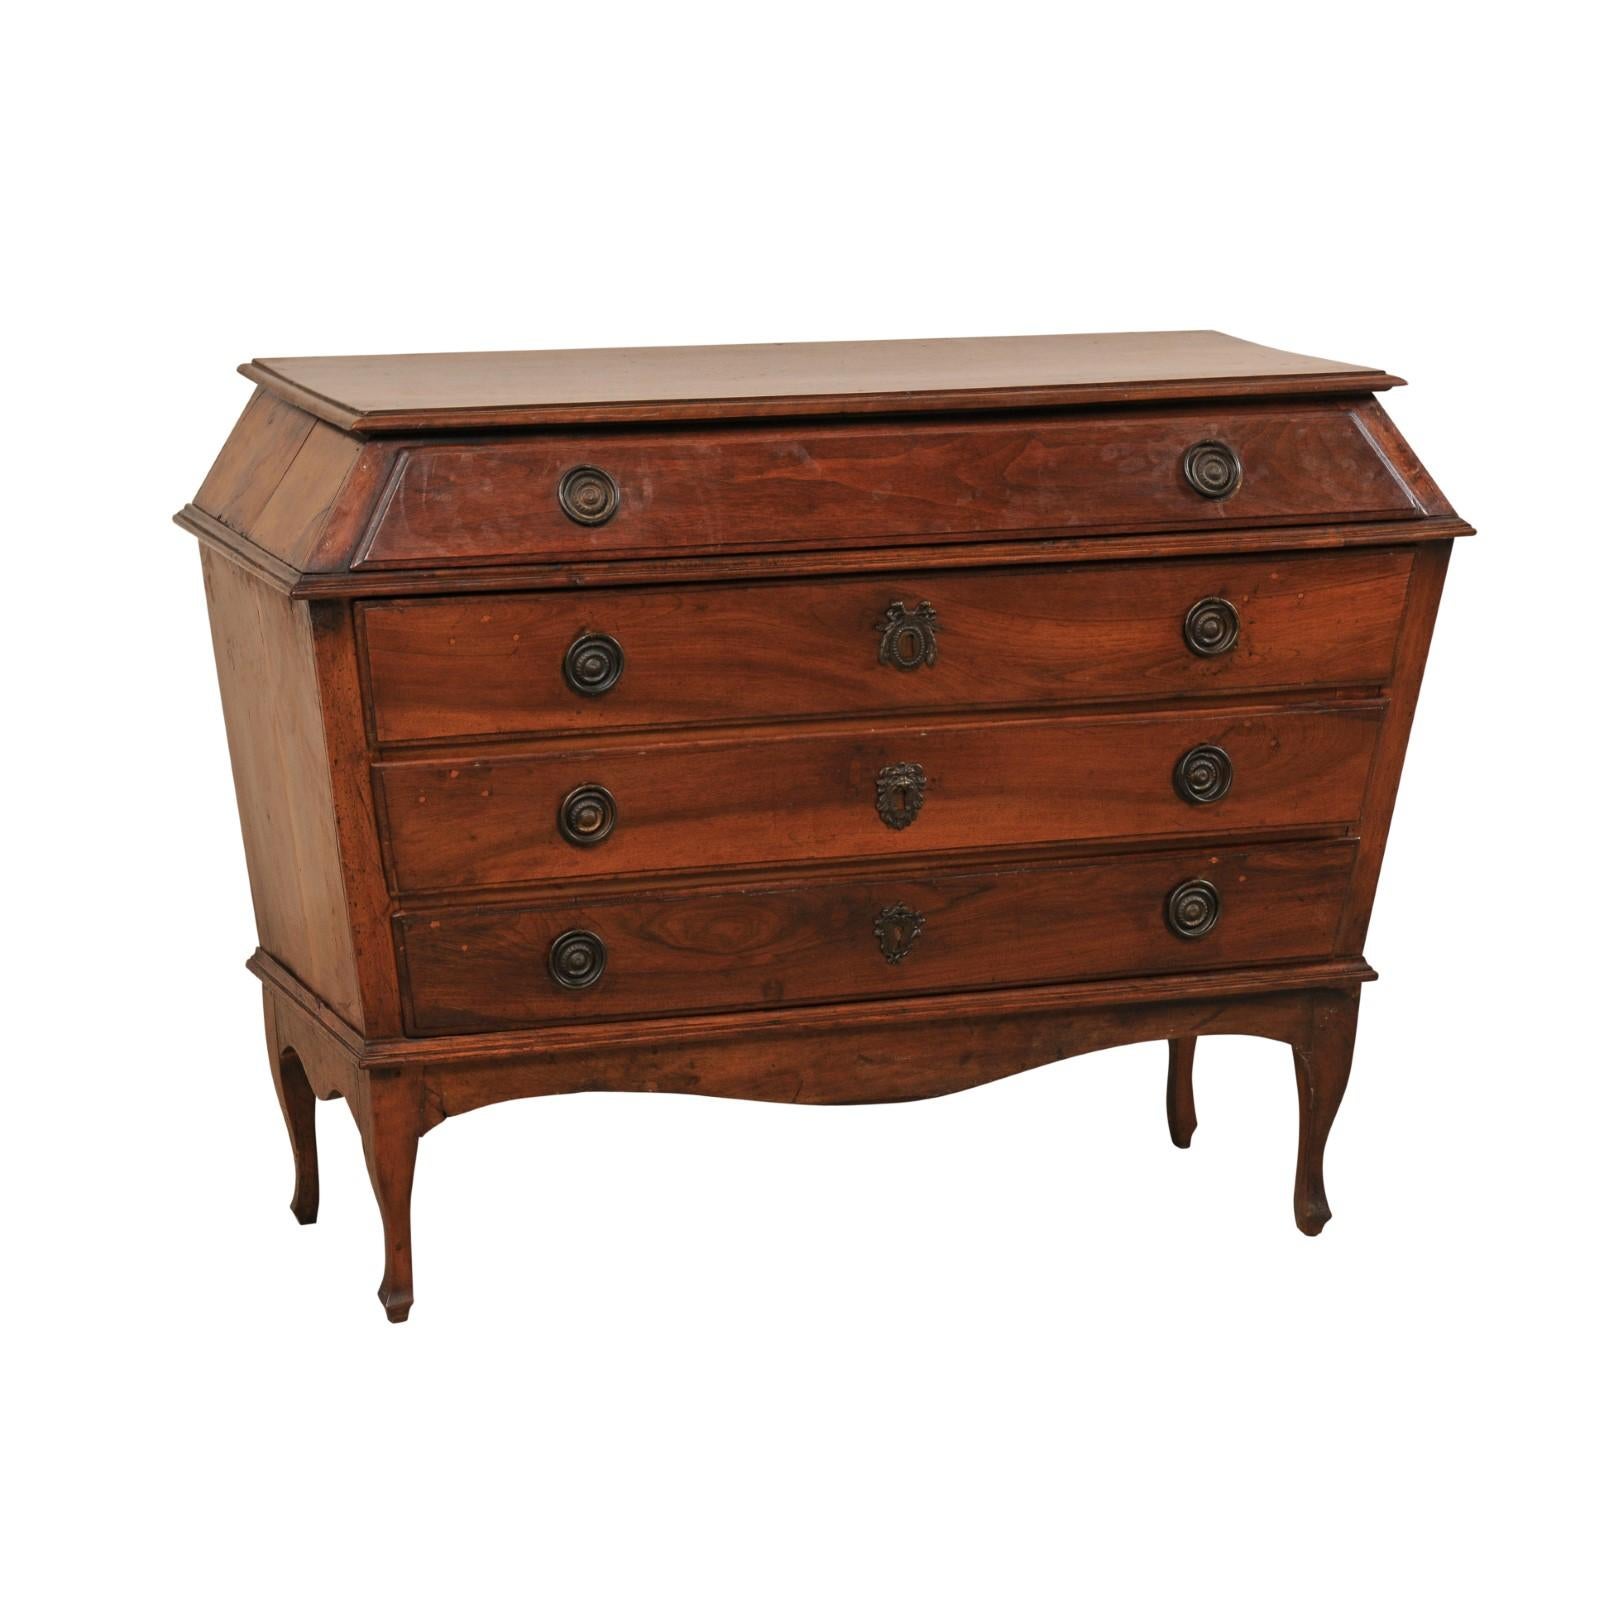 An Exceptional Late 18th C. Italian Walnut Commode w/ Unique Triangulated Shape